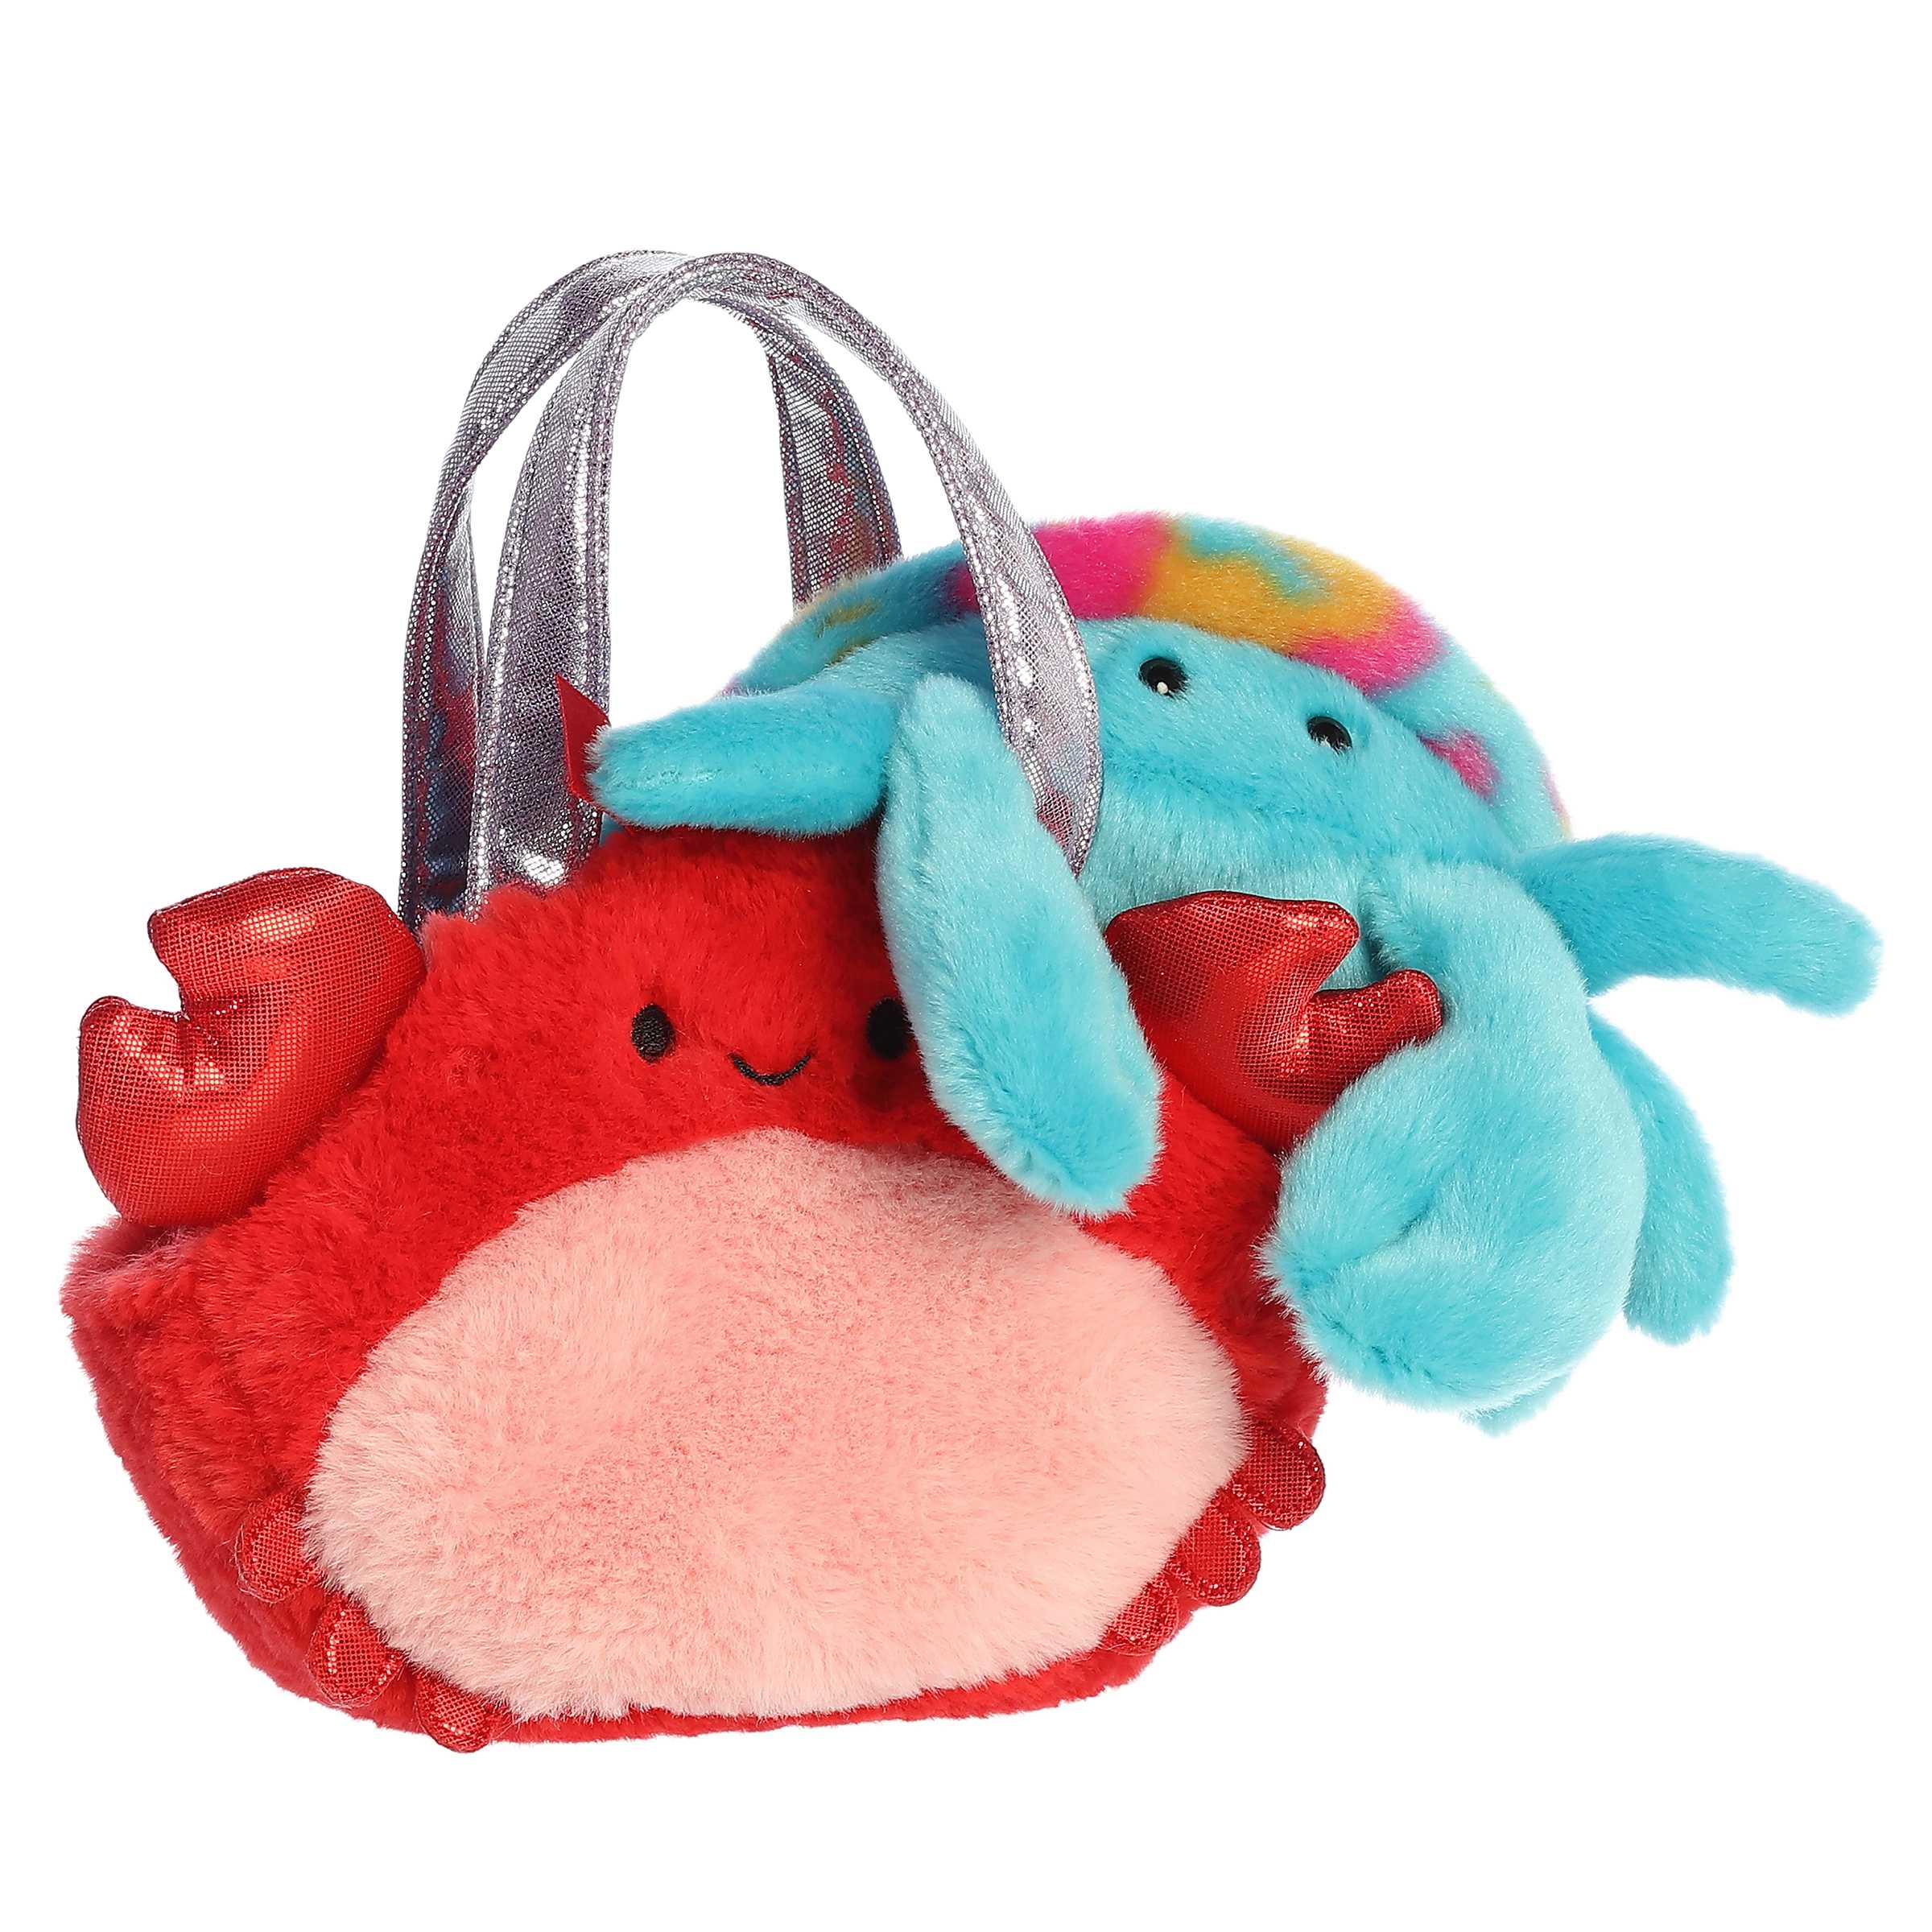 Soft blue Crab plush in a vibrant carrier, perfect for imaginative play or as a delightful gift.